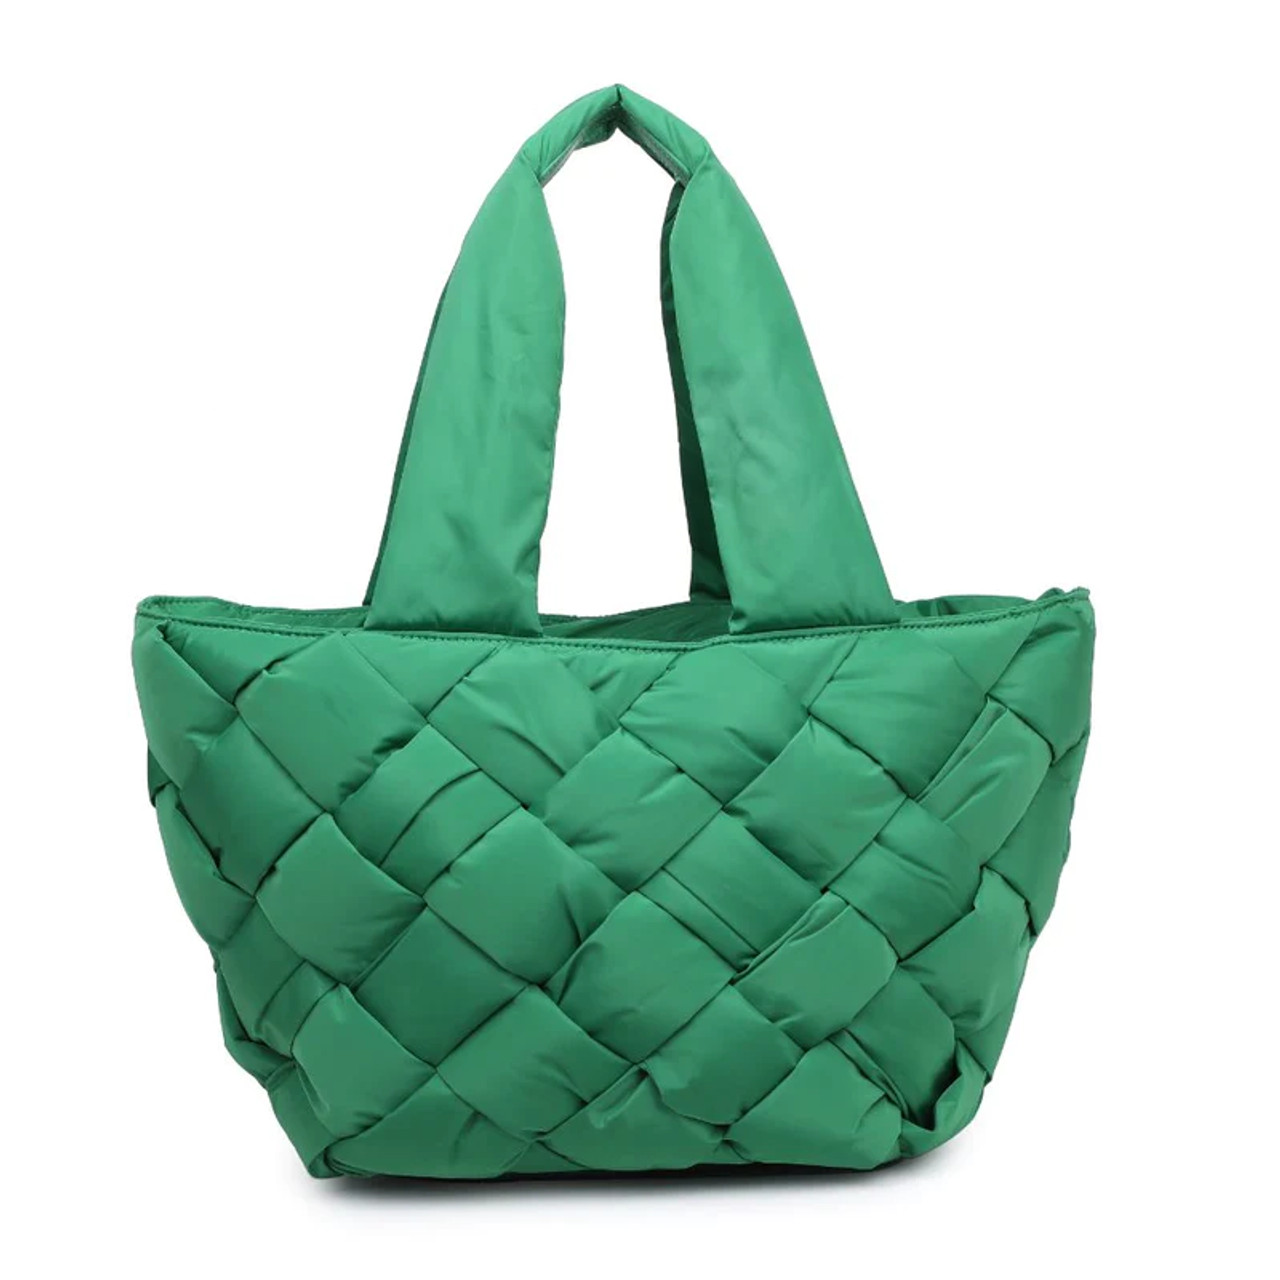  Intuition East West Tote - Kelly Green      Intuition East West Tote - Kelly Green     Intuition East West Tote - Kelly Green     Intuition East West Tote - Kelly Green  Intuition East West Tote - Kelly Green